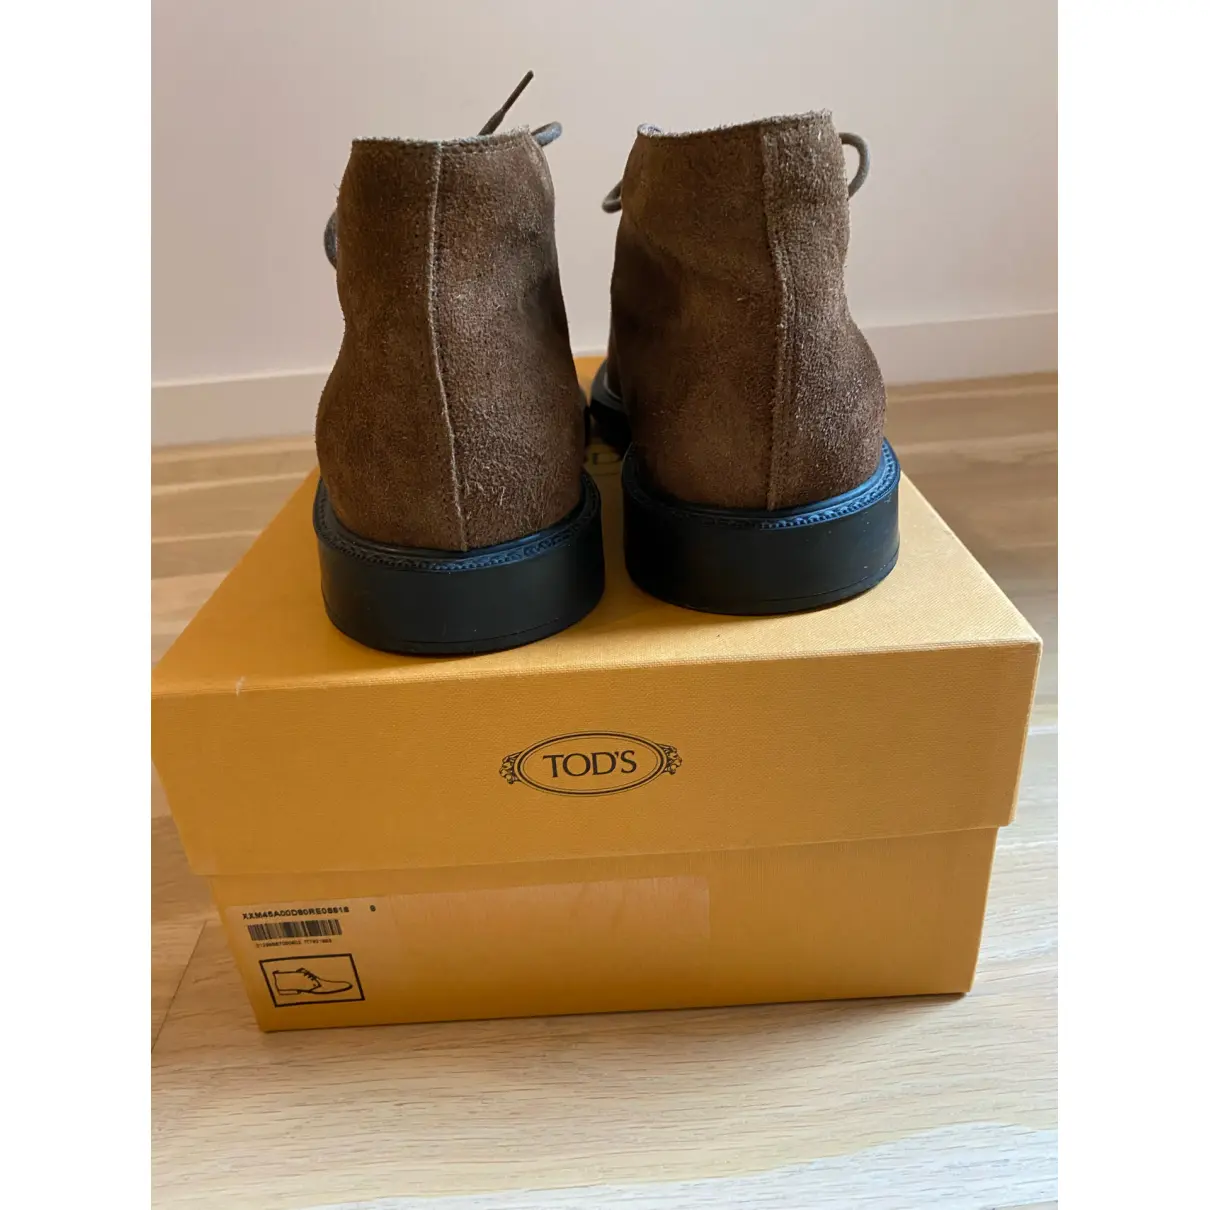 Buy Tod's Boots online